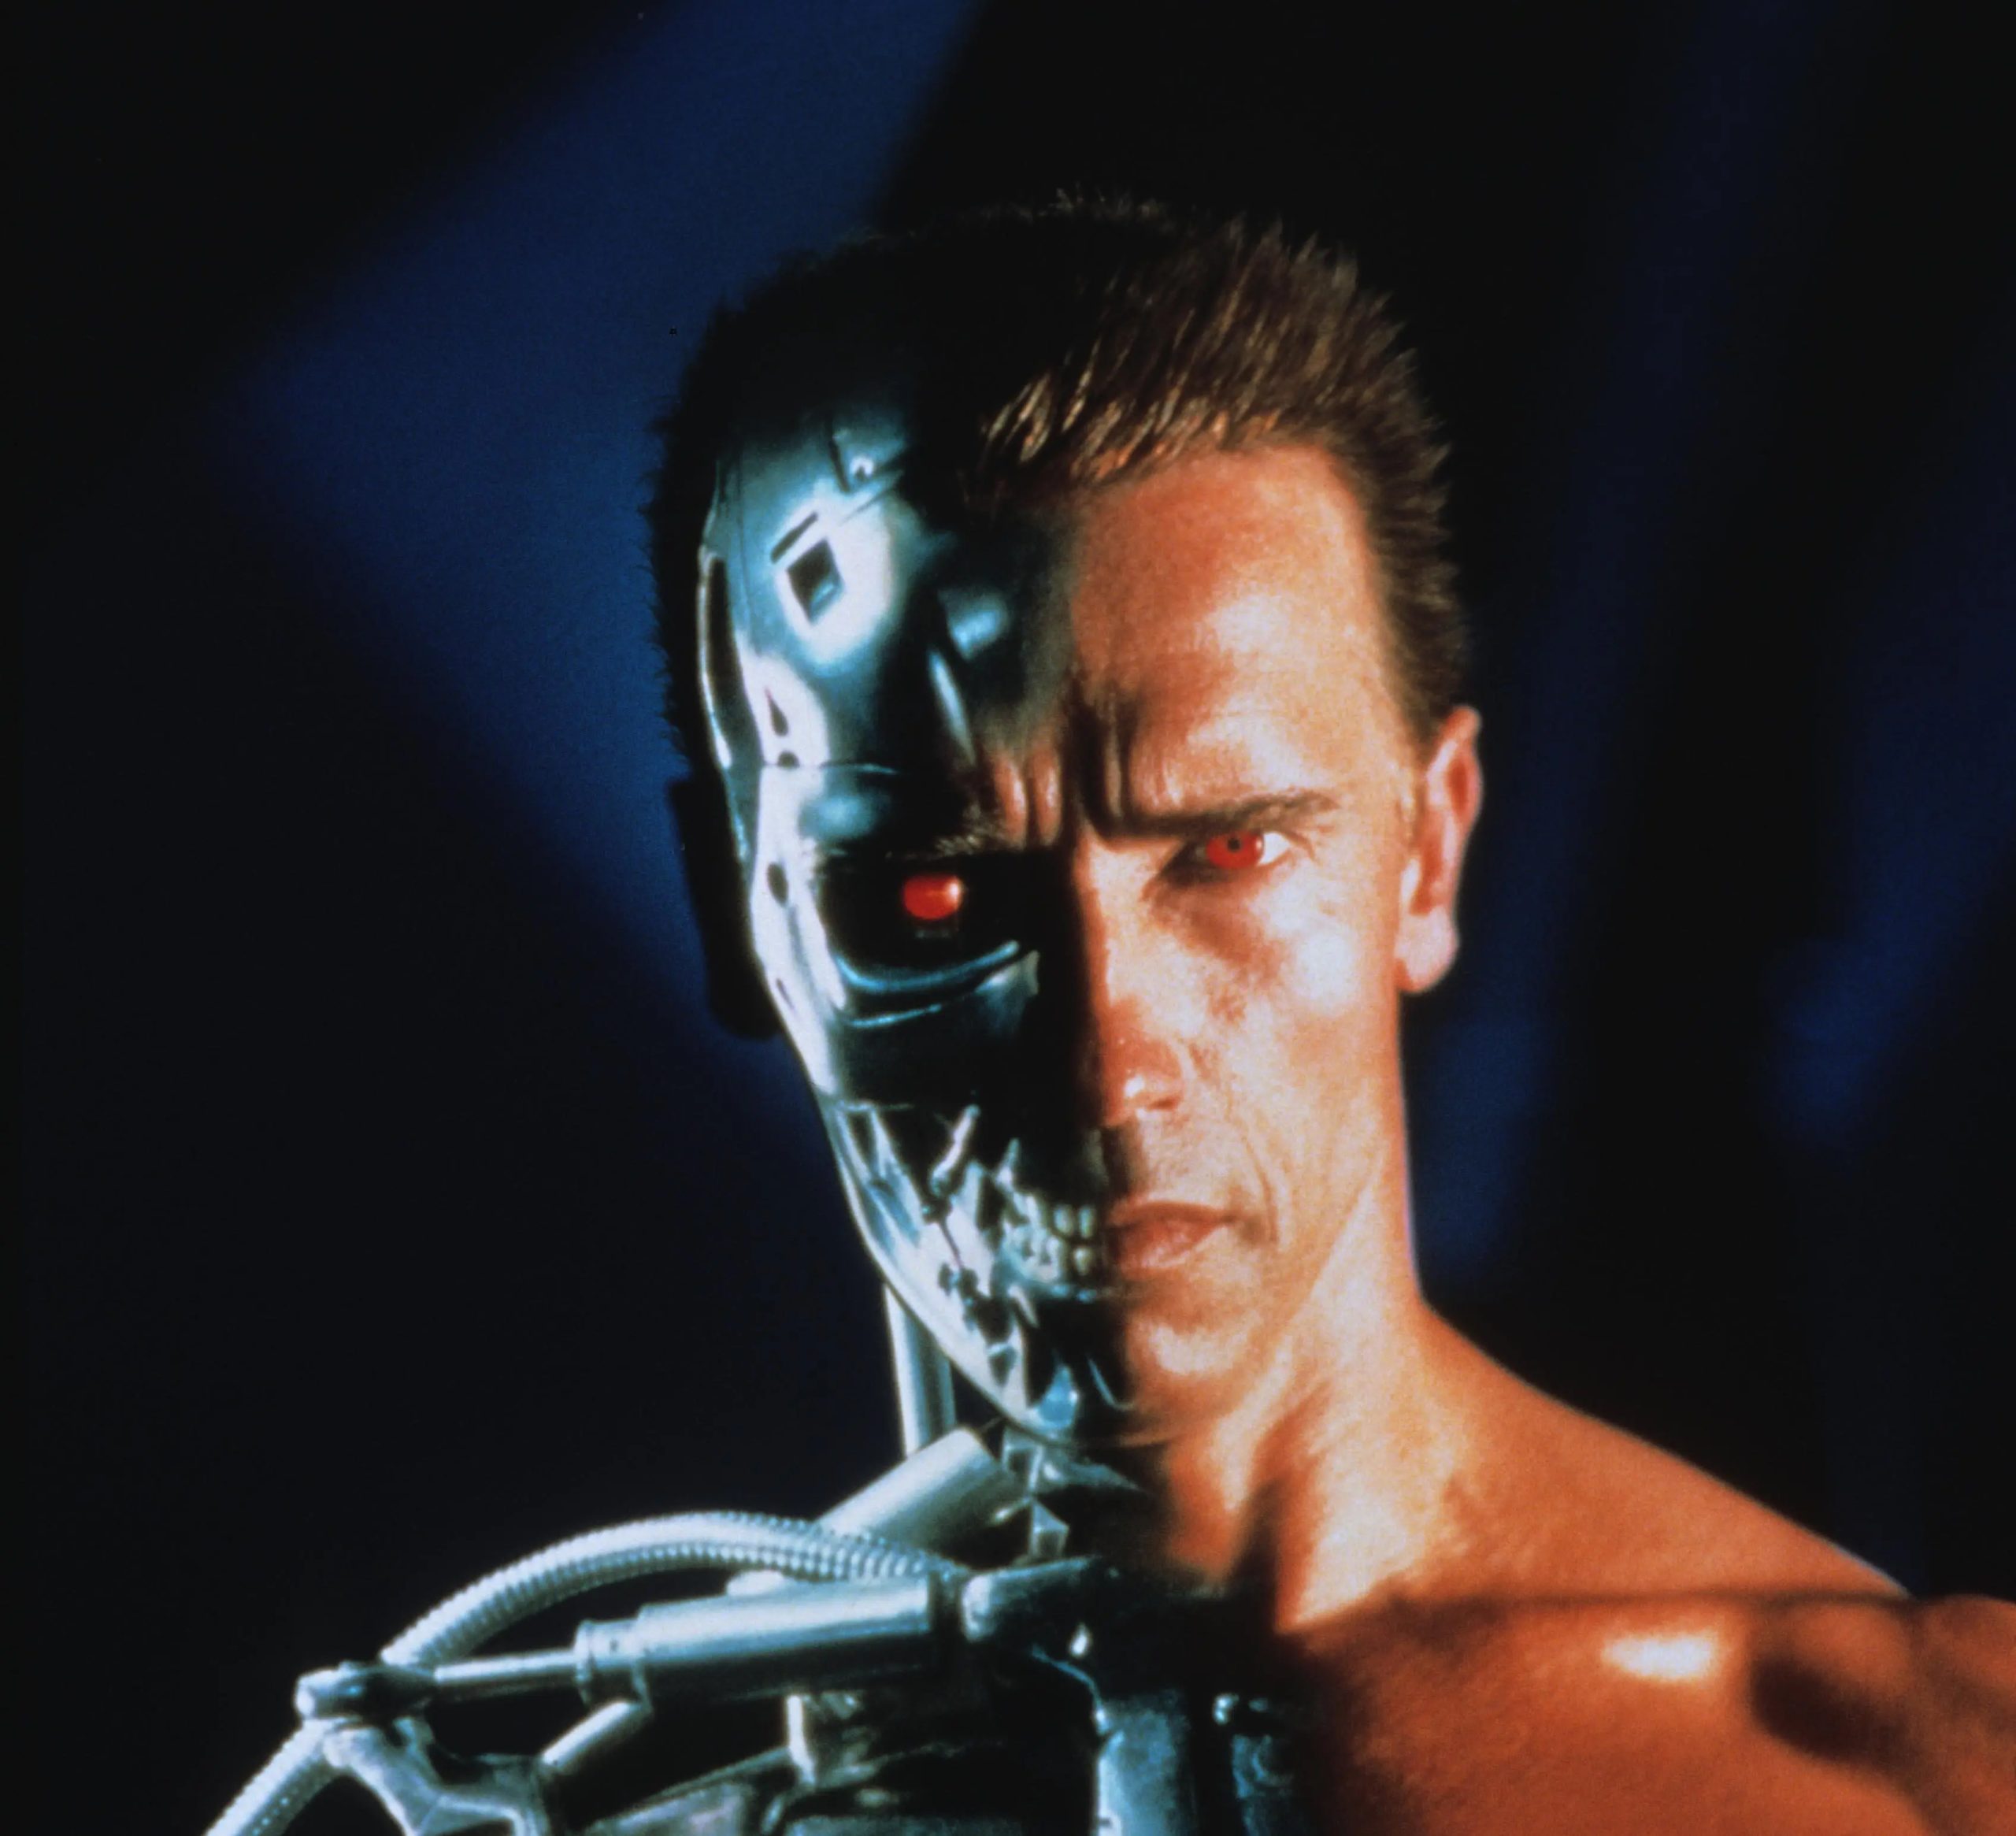 Terminator 2 Is One of IMDb's Highest Rated Sci-Fi Films of All Time